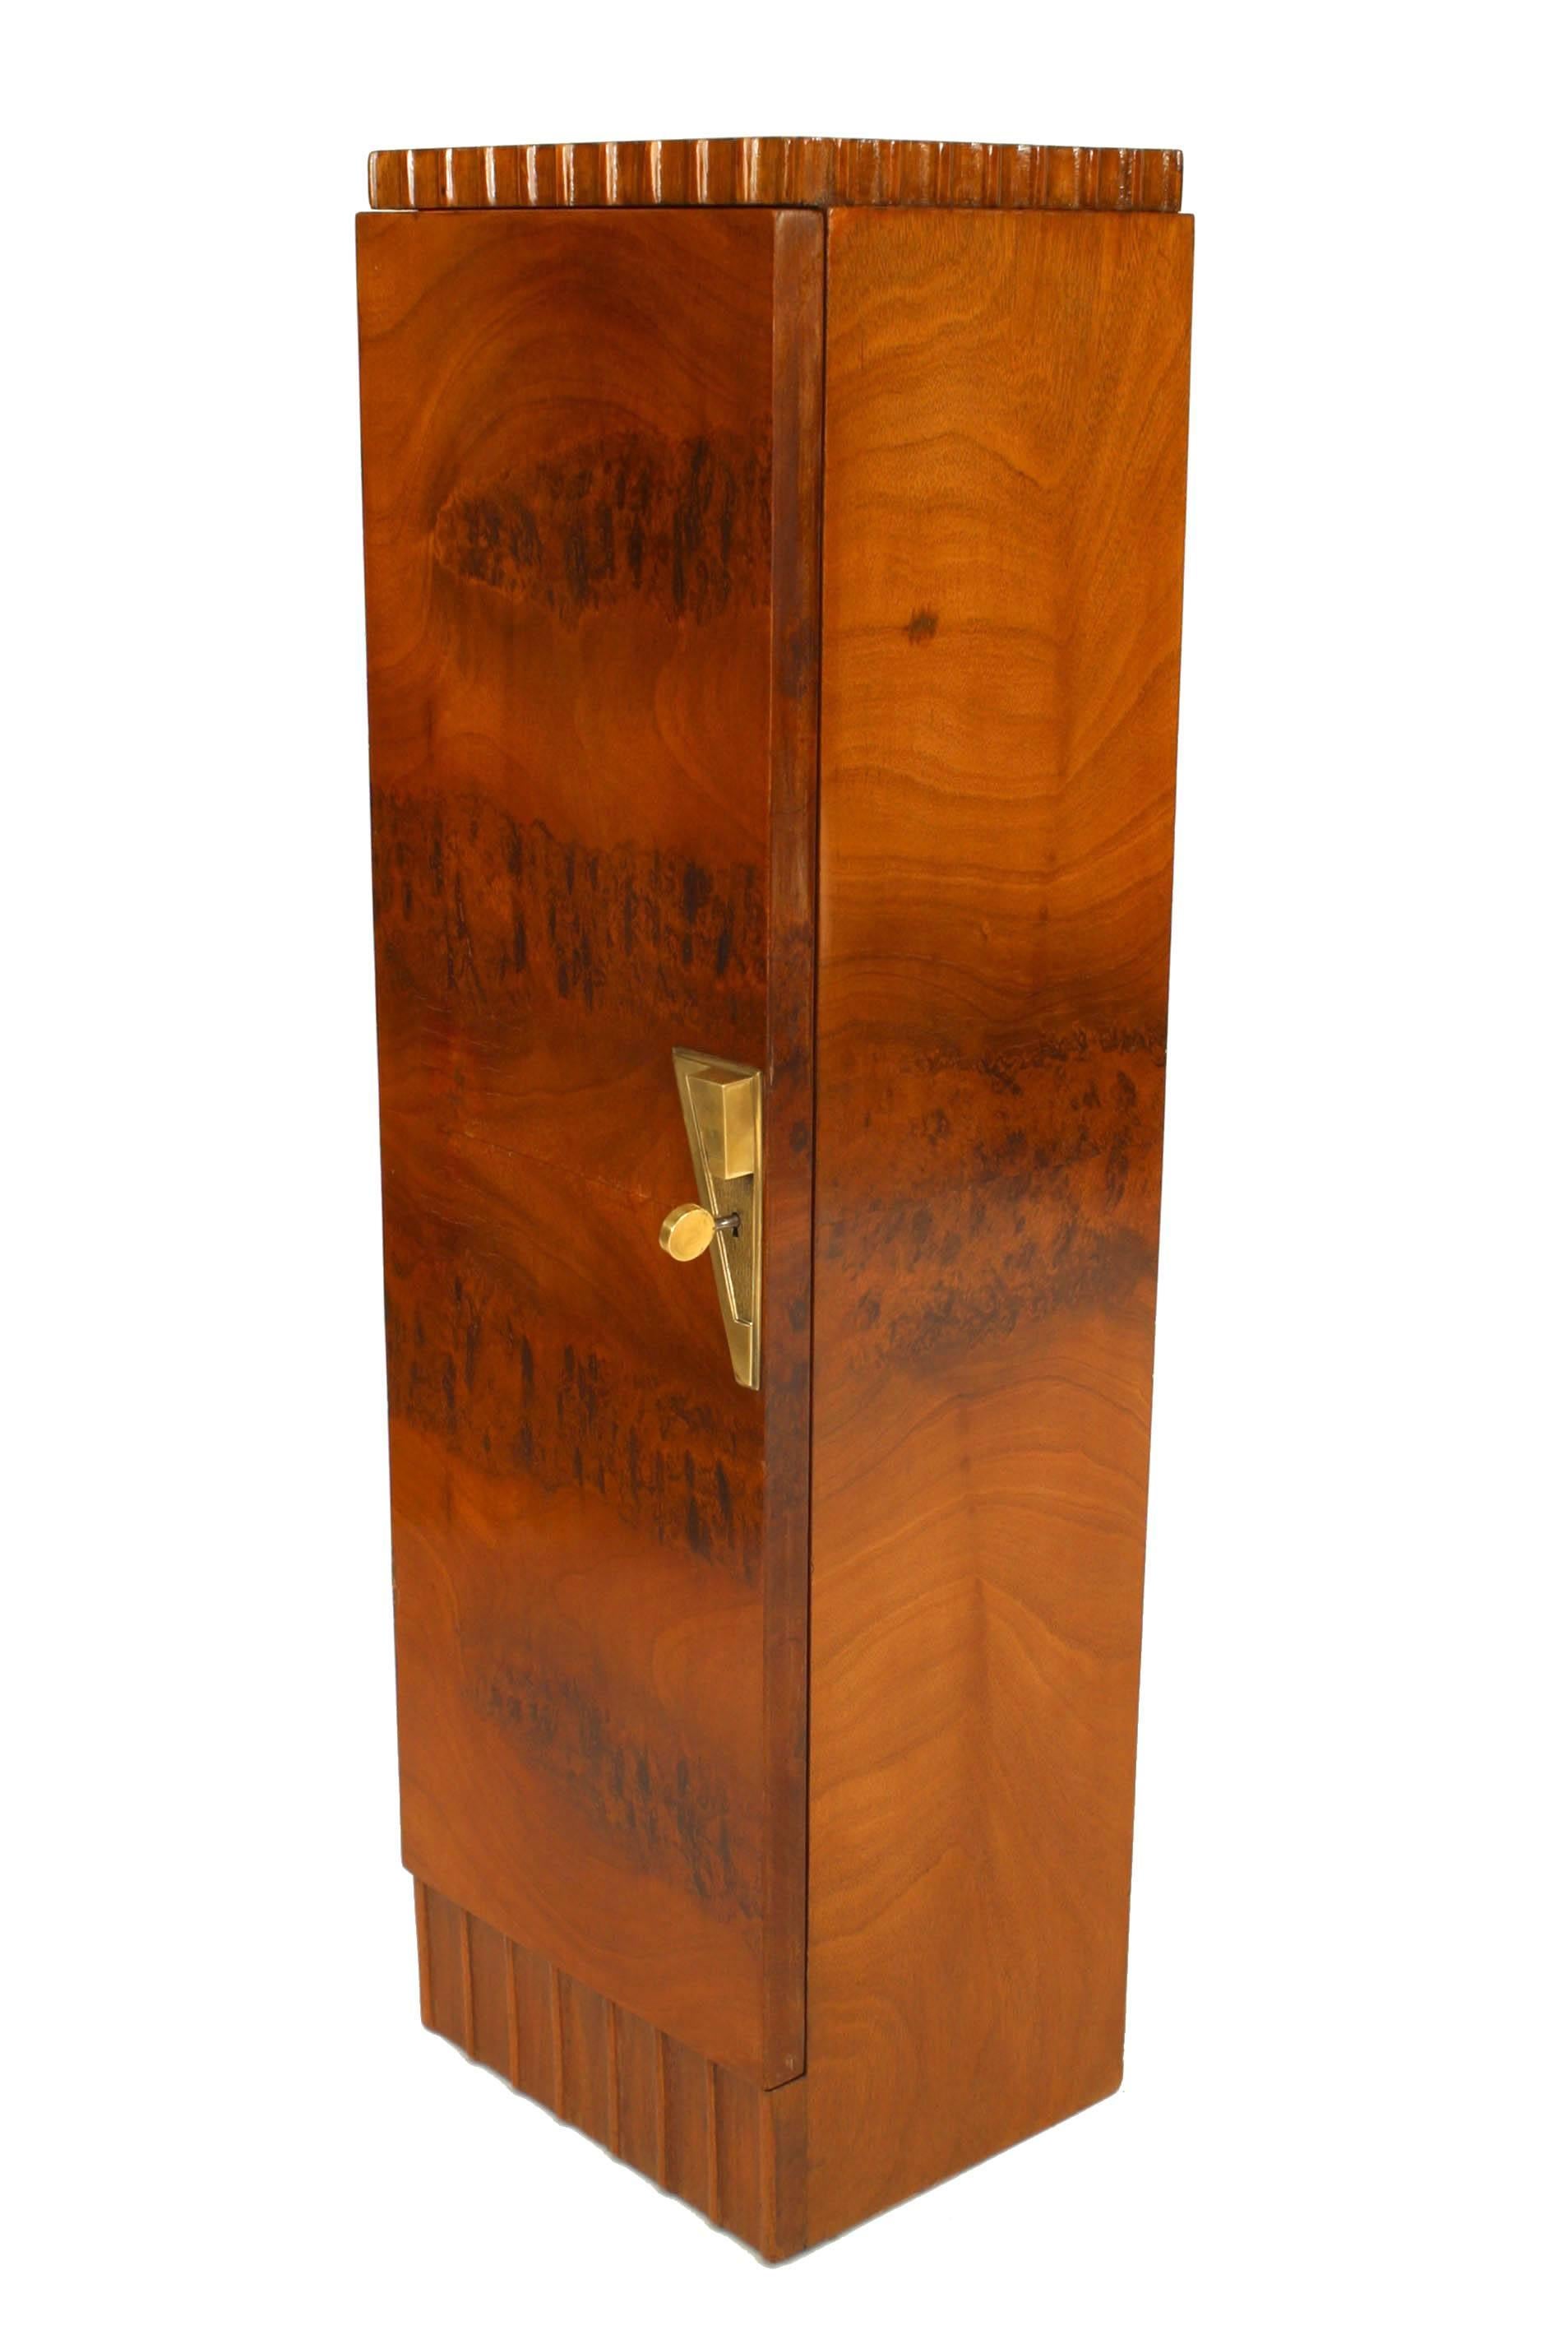 Pair of French Art Deco mahogany veneer pedestals/cabinets with a fluted top & bottom edge and a front door with a bronze geometric form keyplate. Finished on back. (att: Roger Bal)
